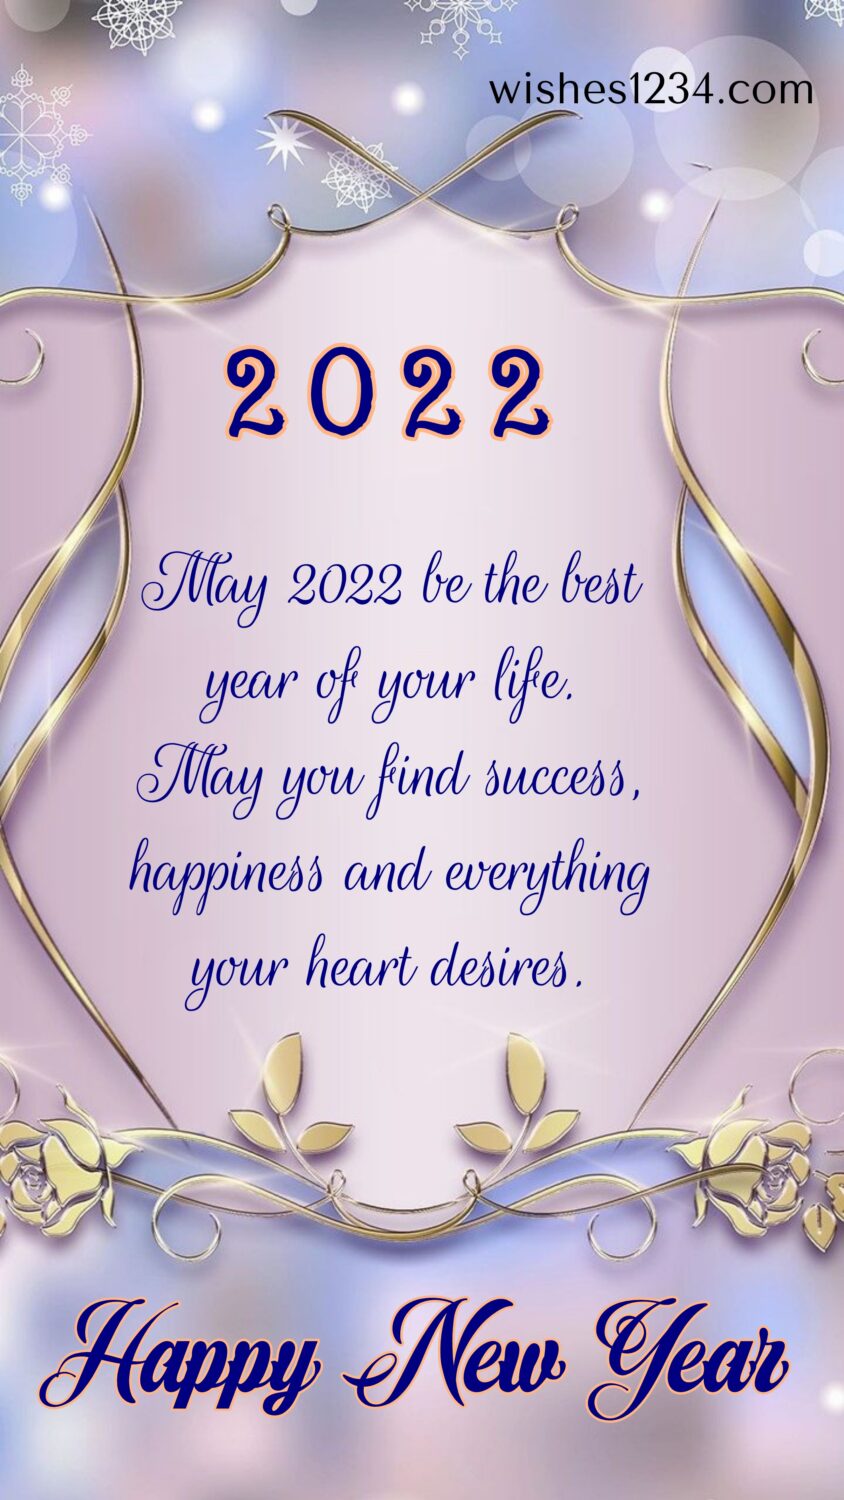 Greeting background wallpaper, happy new year wishes| happy new year quotes 2022